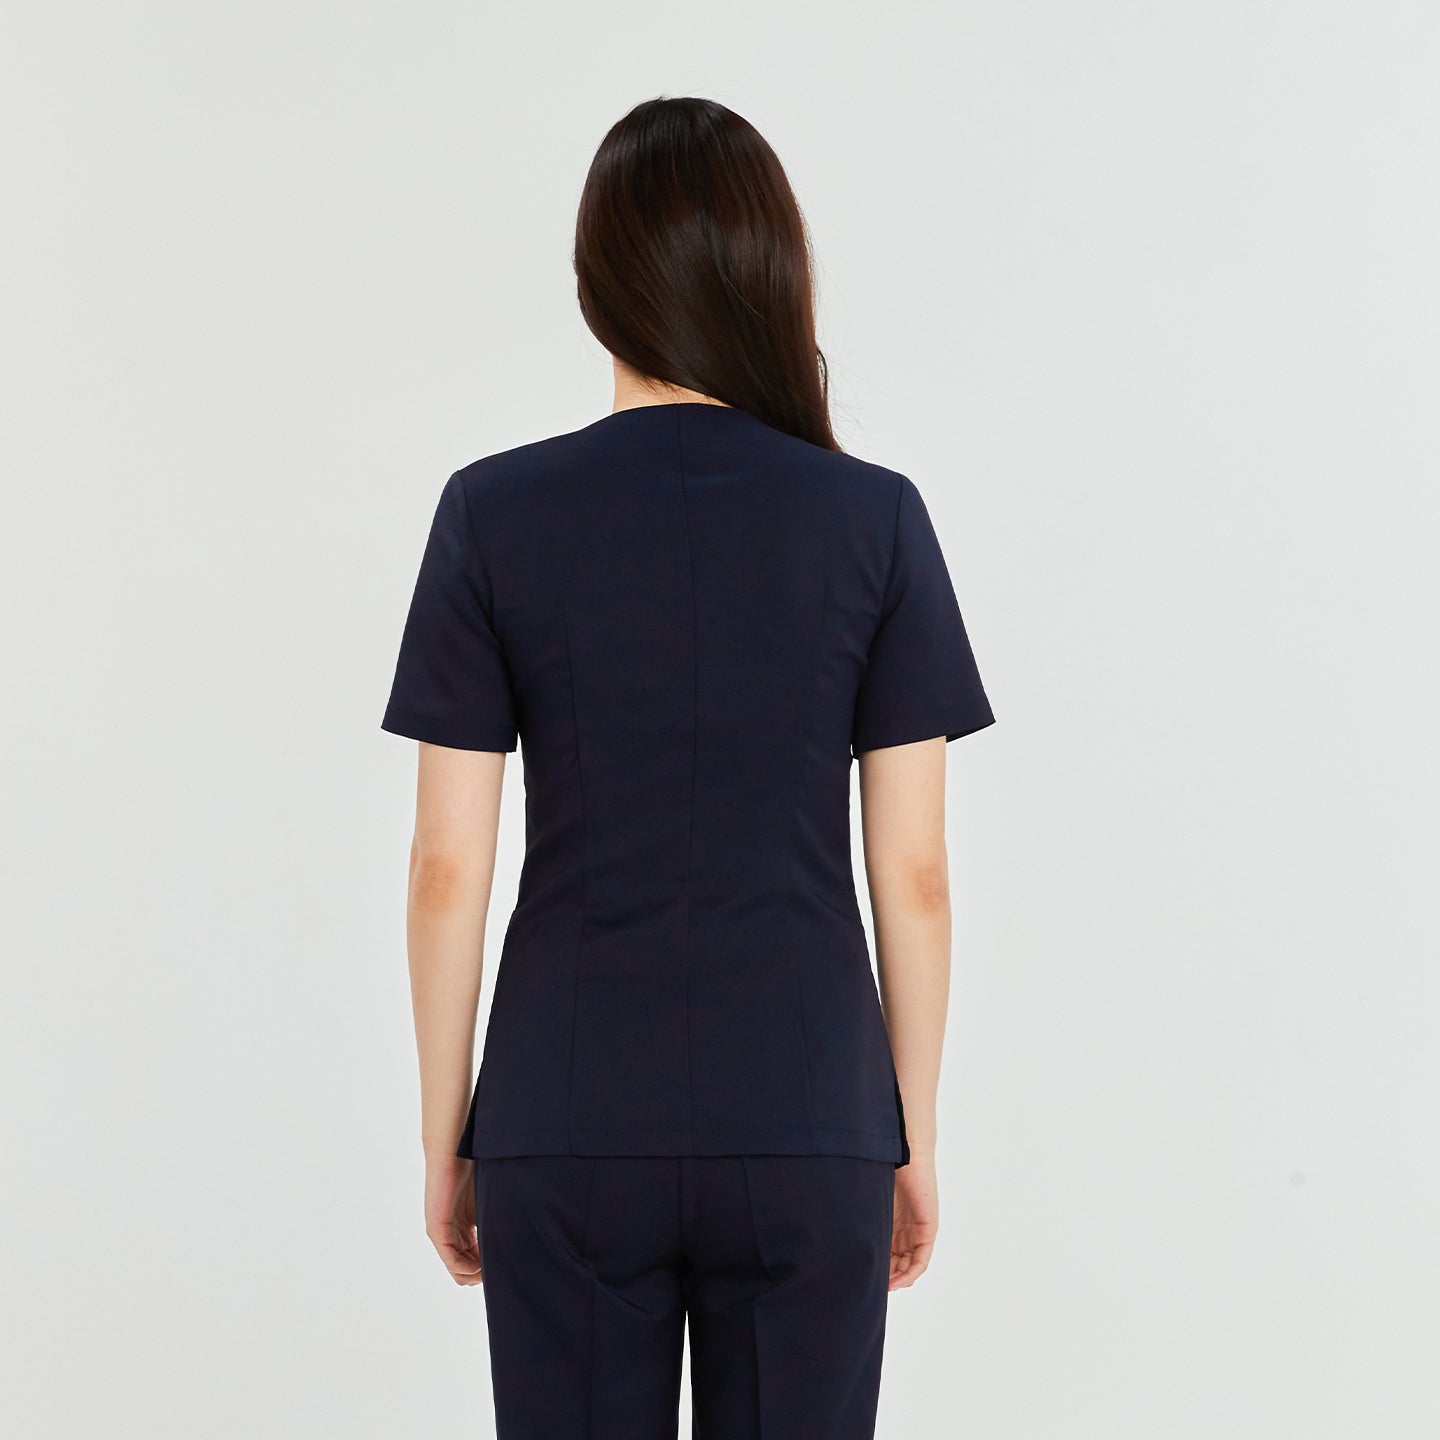 Woman in a navy front zipper scrub top with matching straight-leg pants, standing with her back to the camera,Navy